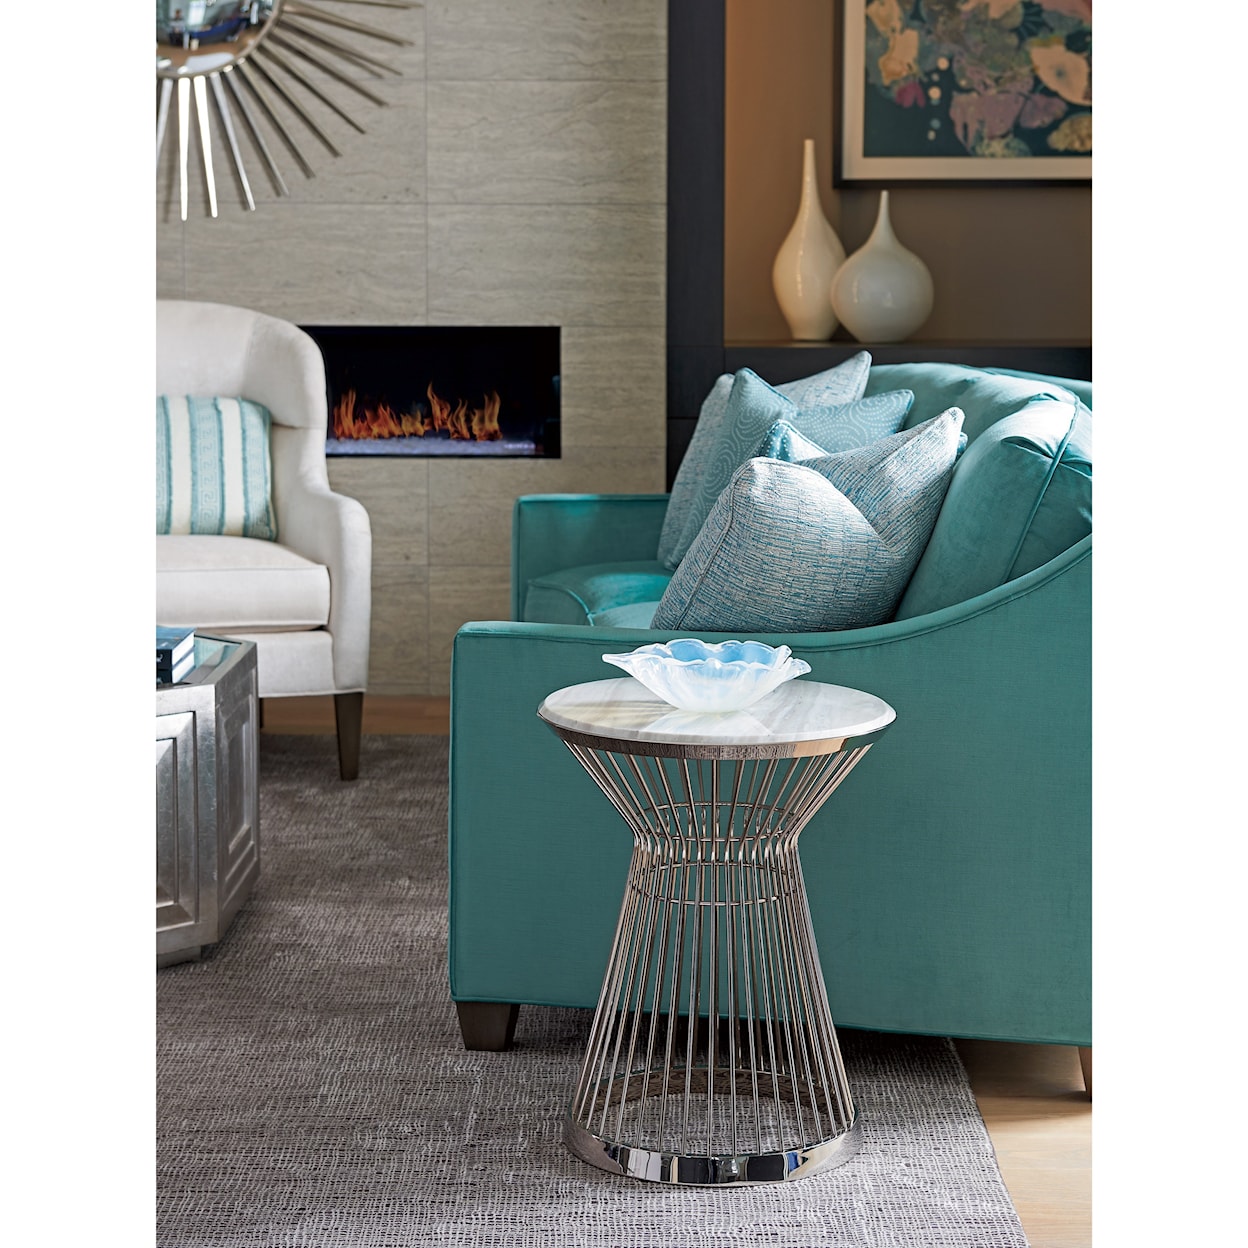 Lexington Ariana Martini Stainless Accent Table